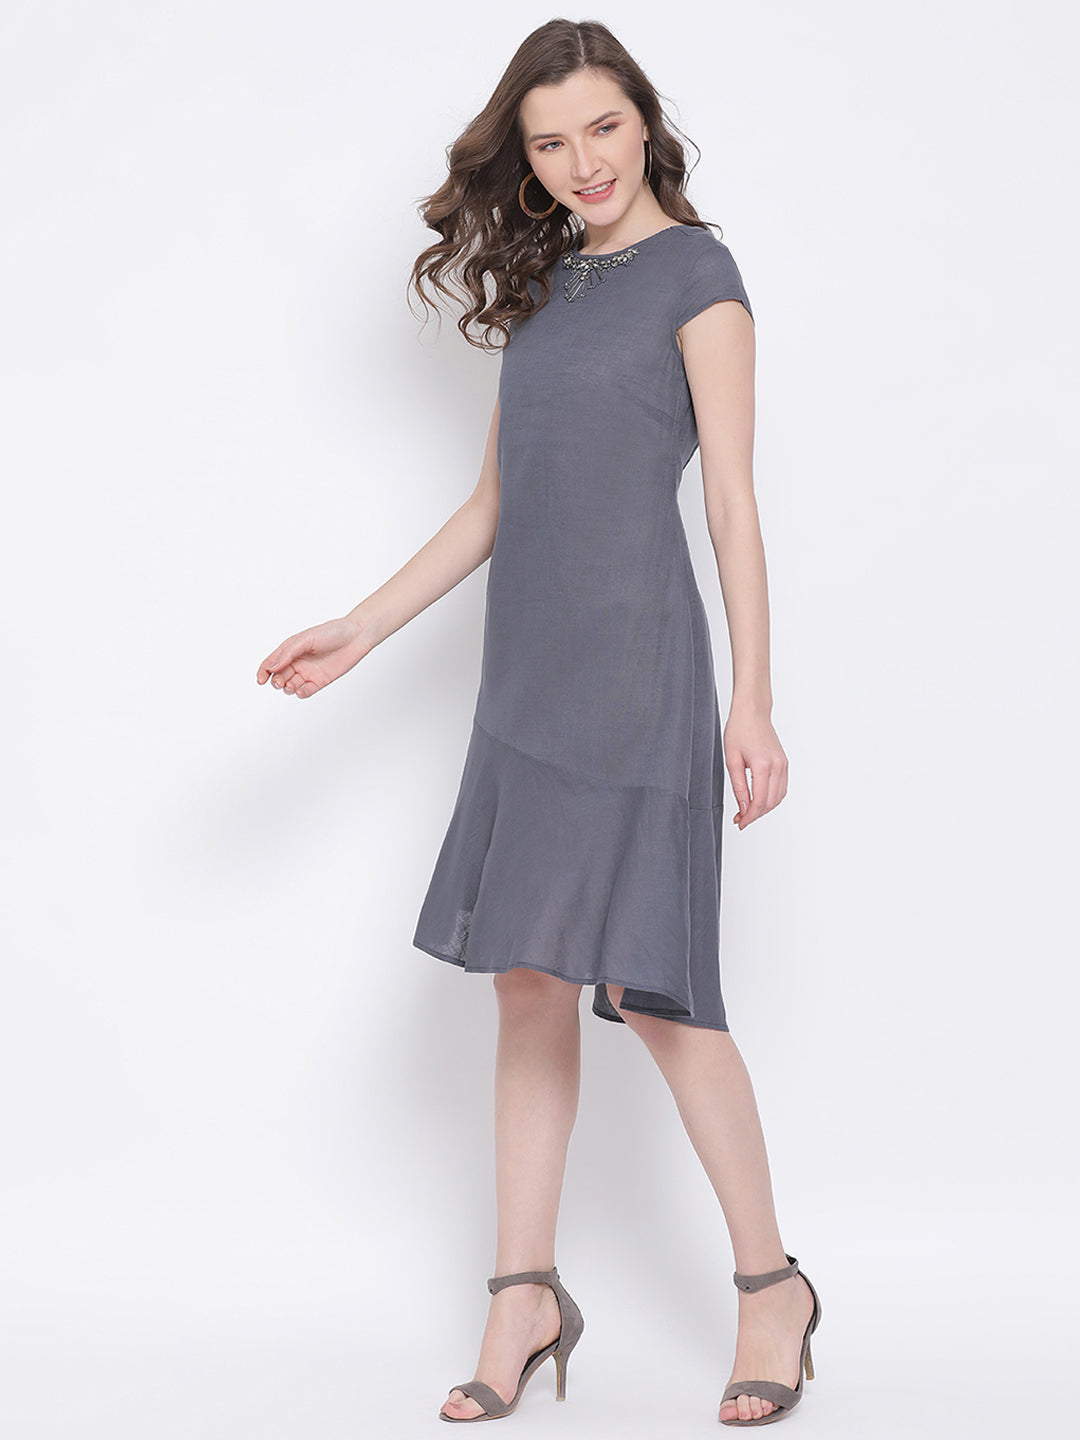 LY2 Cotton hand embelleshed dress